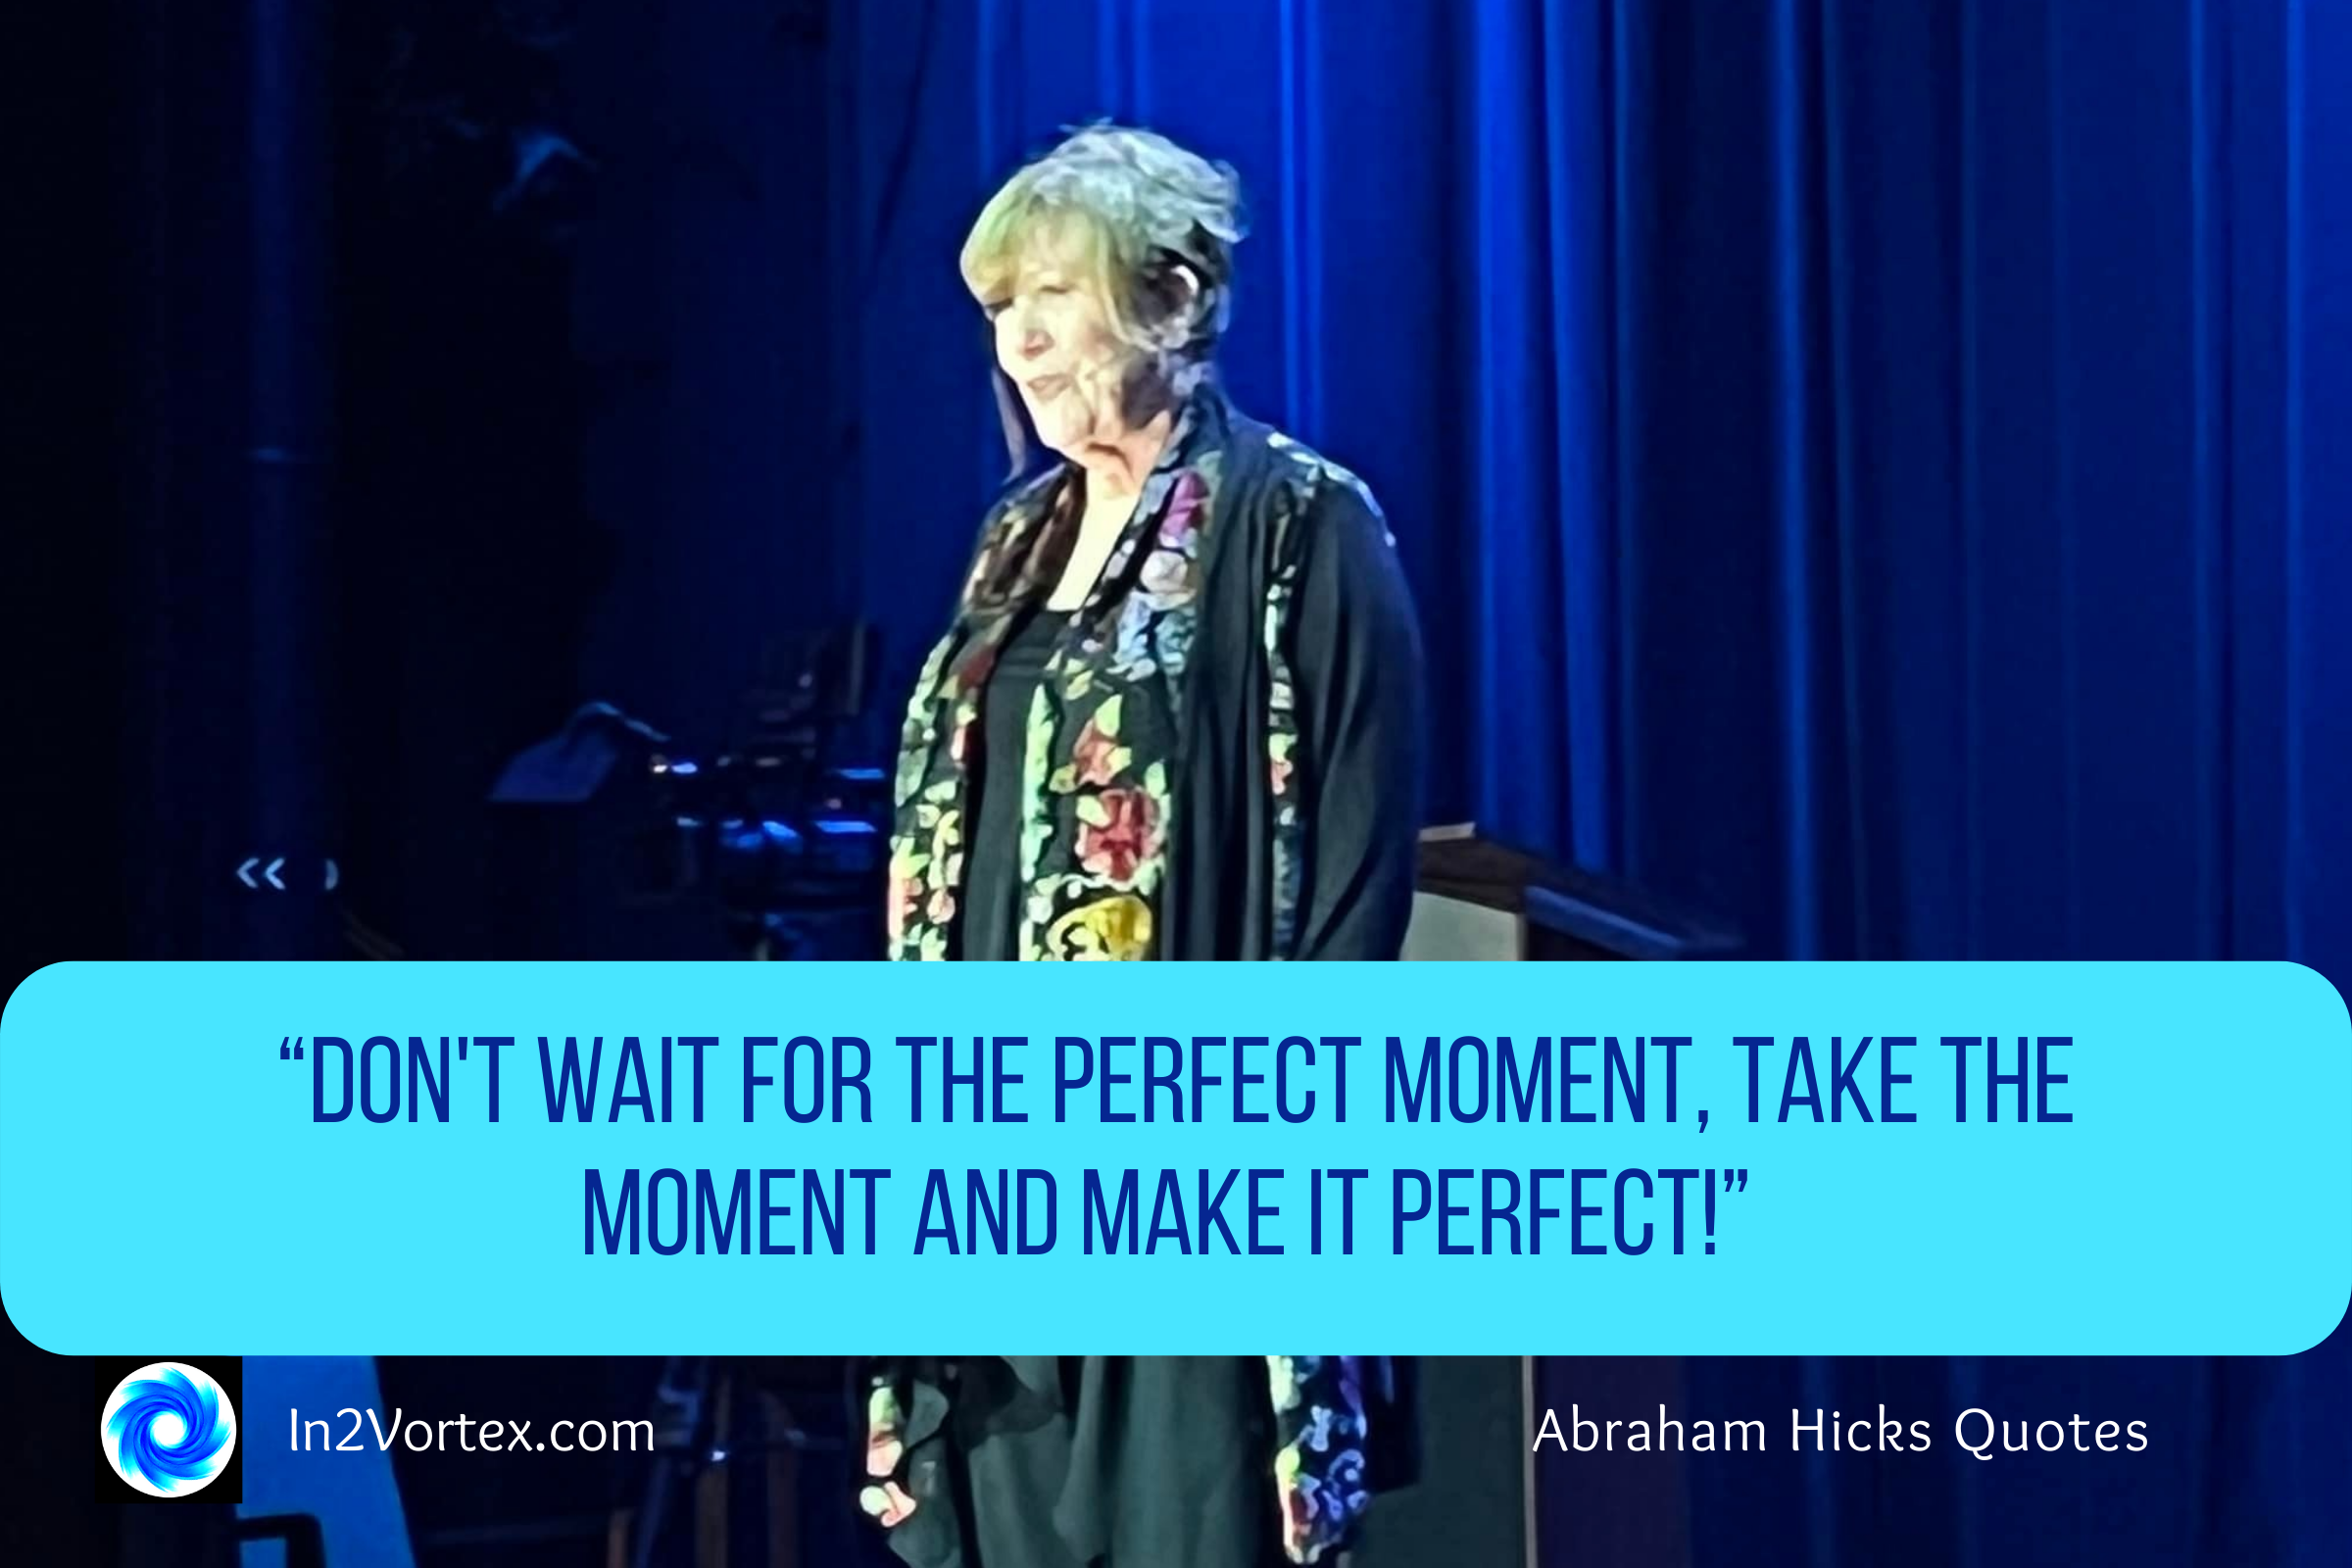 In2Vortex.com, “Don't wait for the perfect moment, take the moment and make it perfect!” Abraham Hicks Quotes